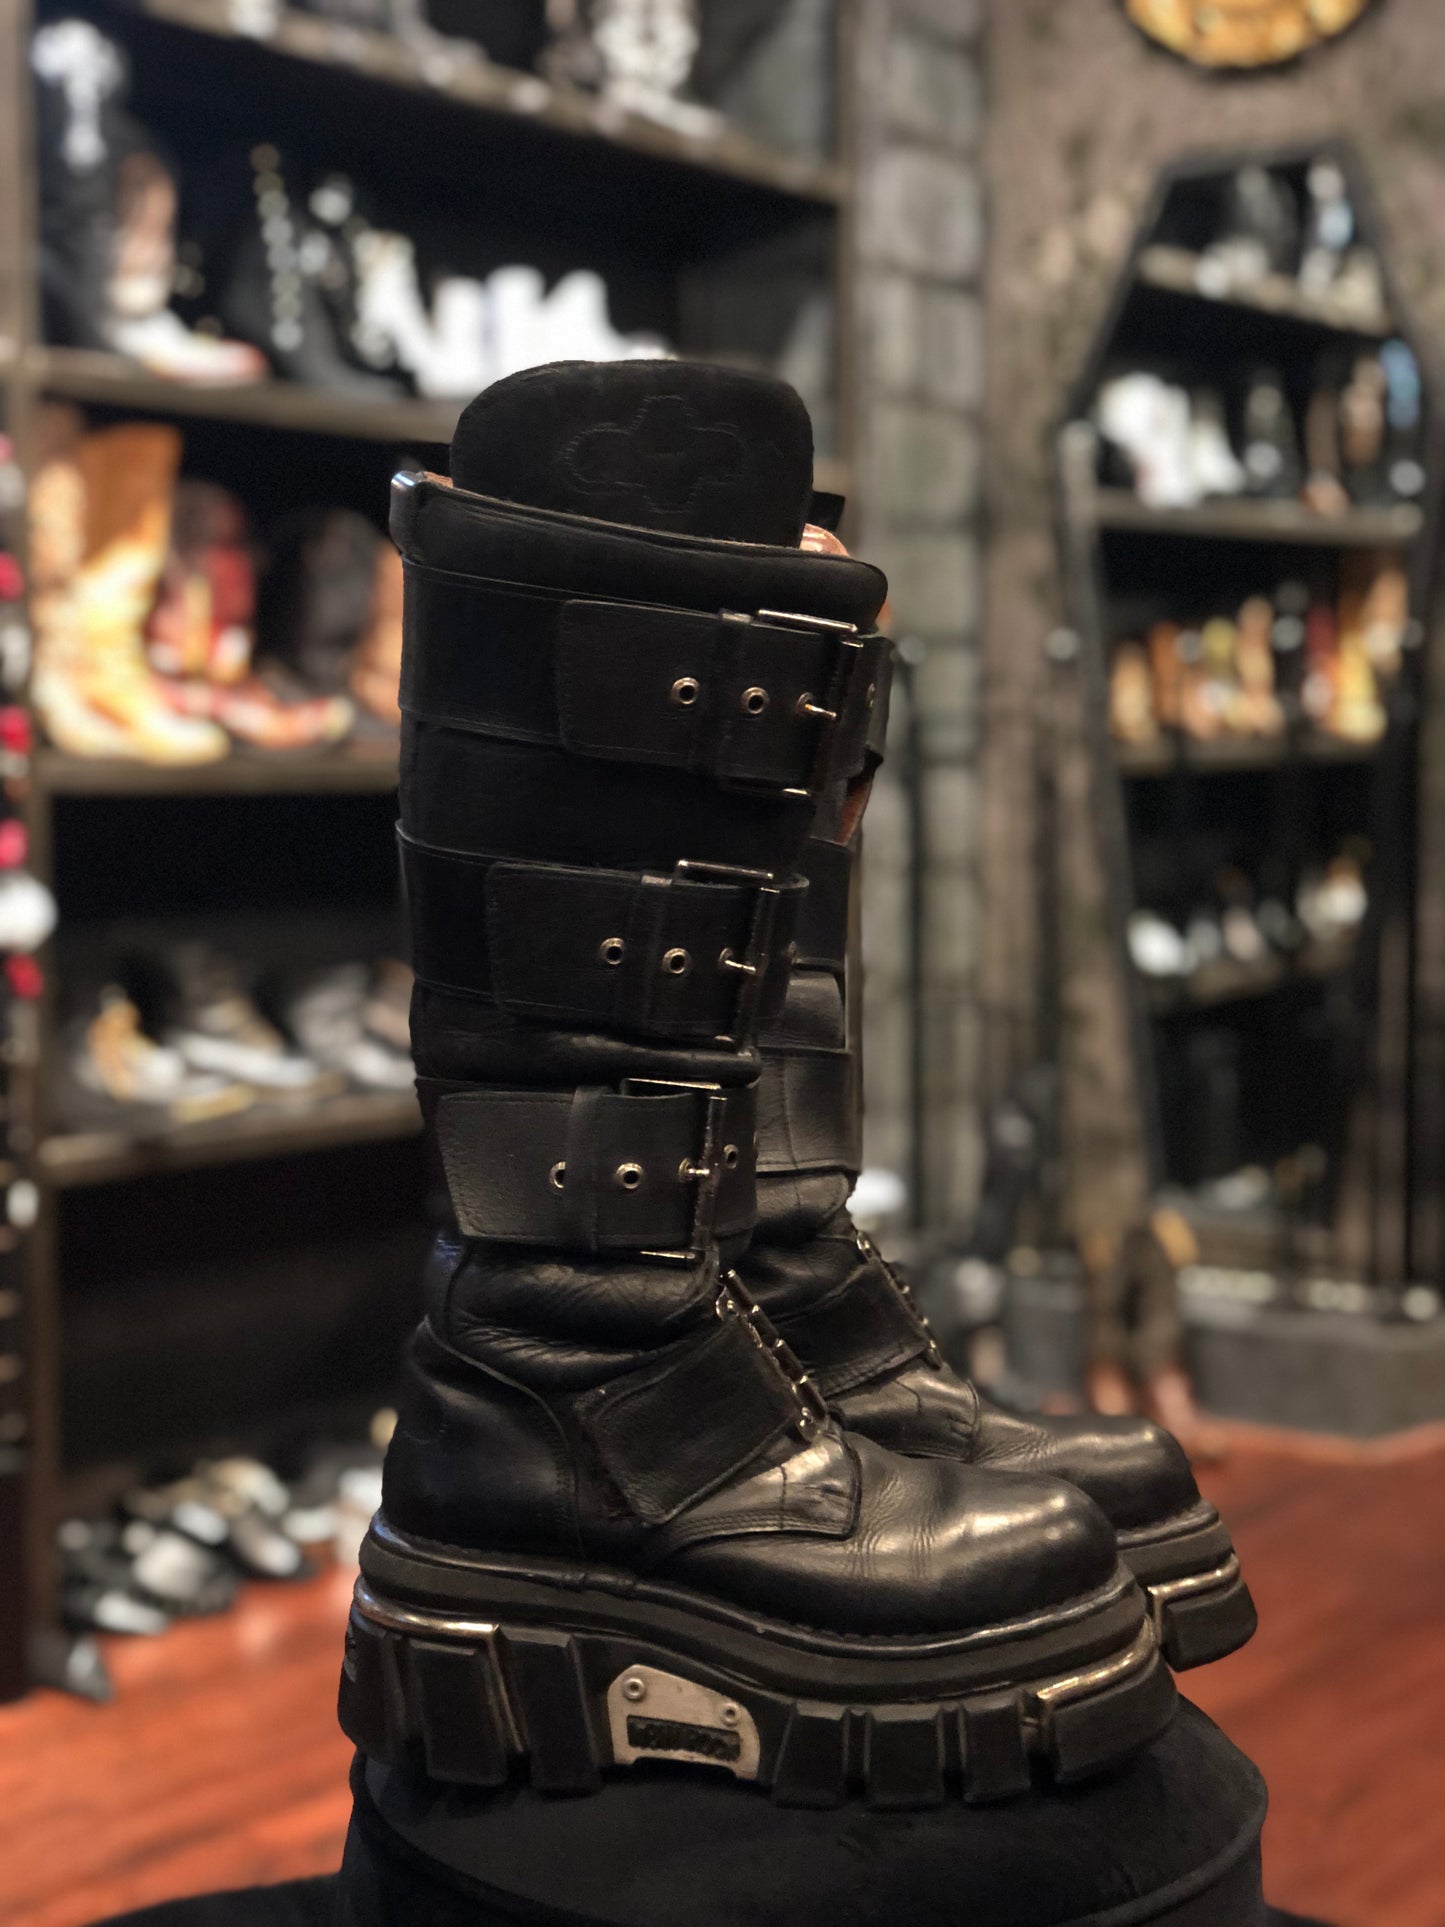 Rare Vintage New Rock Leather Buckled High Boots Size Women’s 8.5